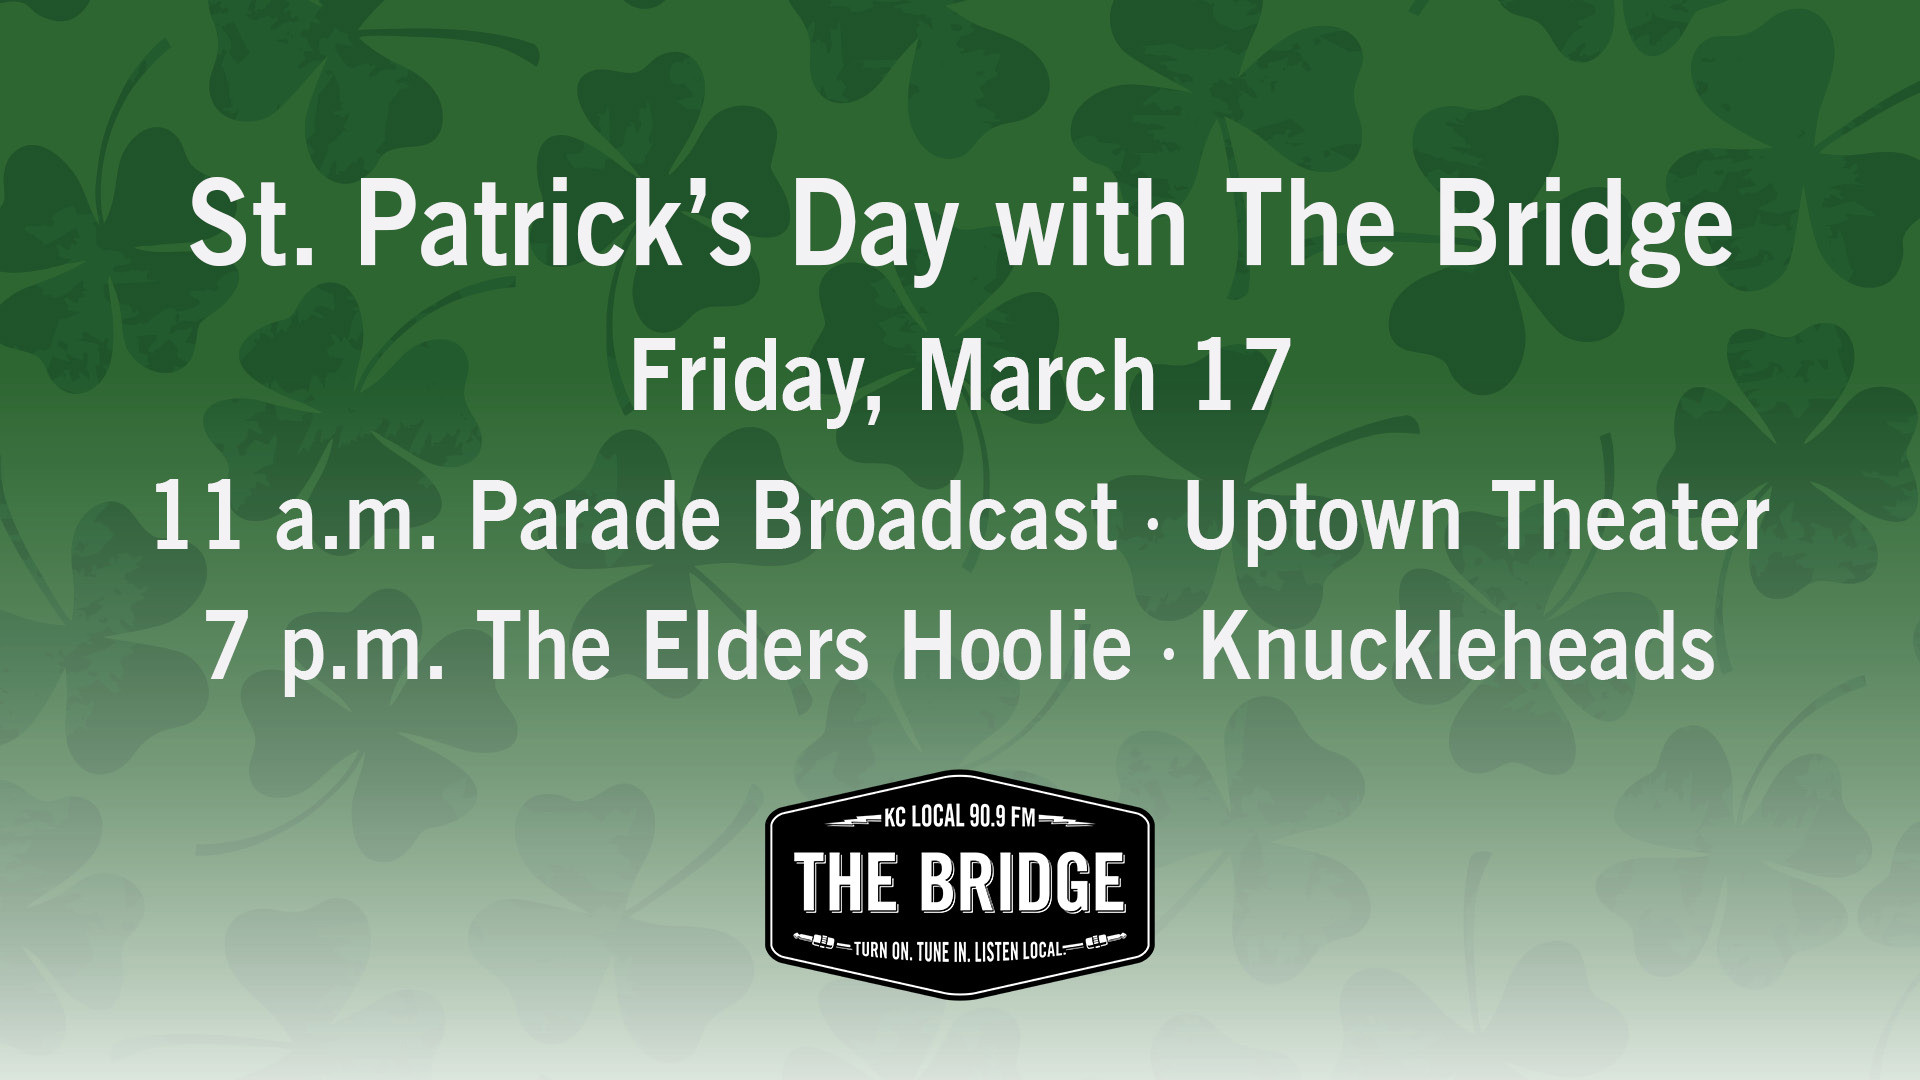 The Luck o' the Irish - Where to Celebrate St. Patrick's Day